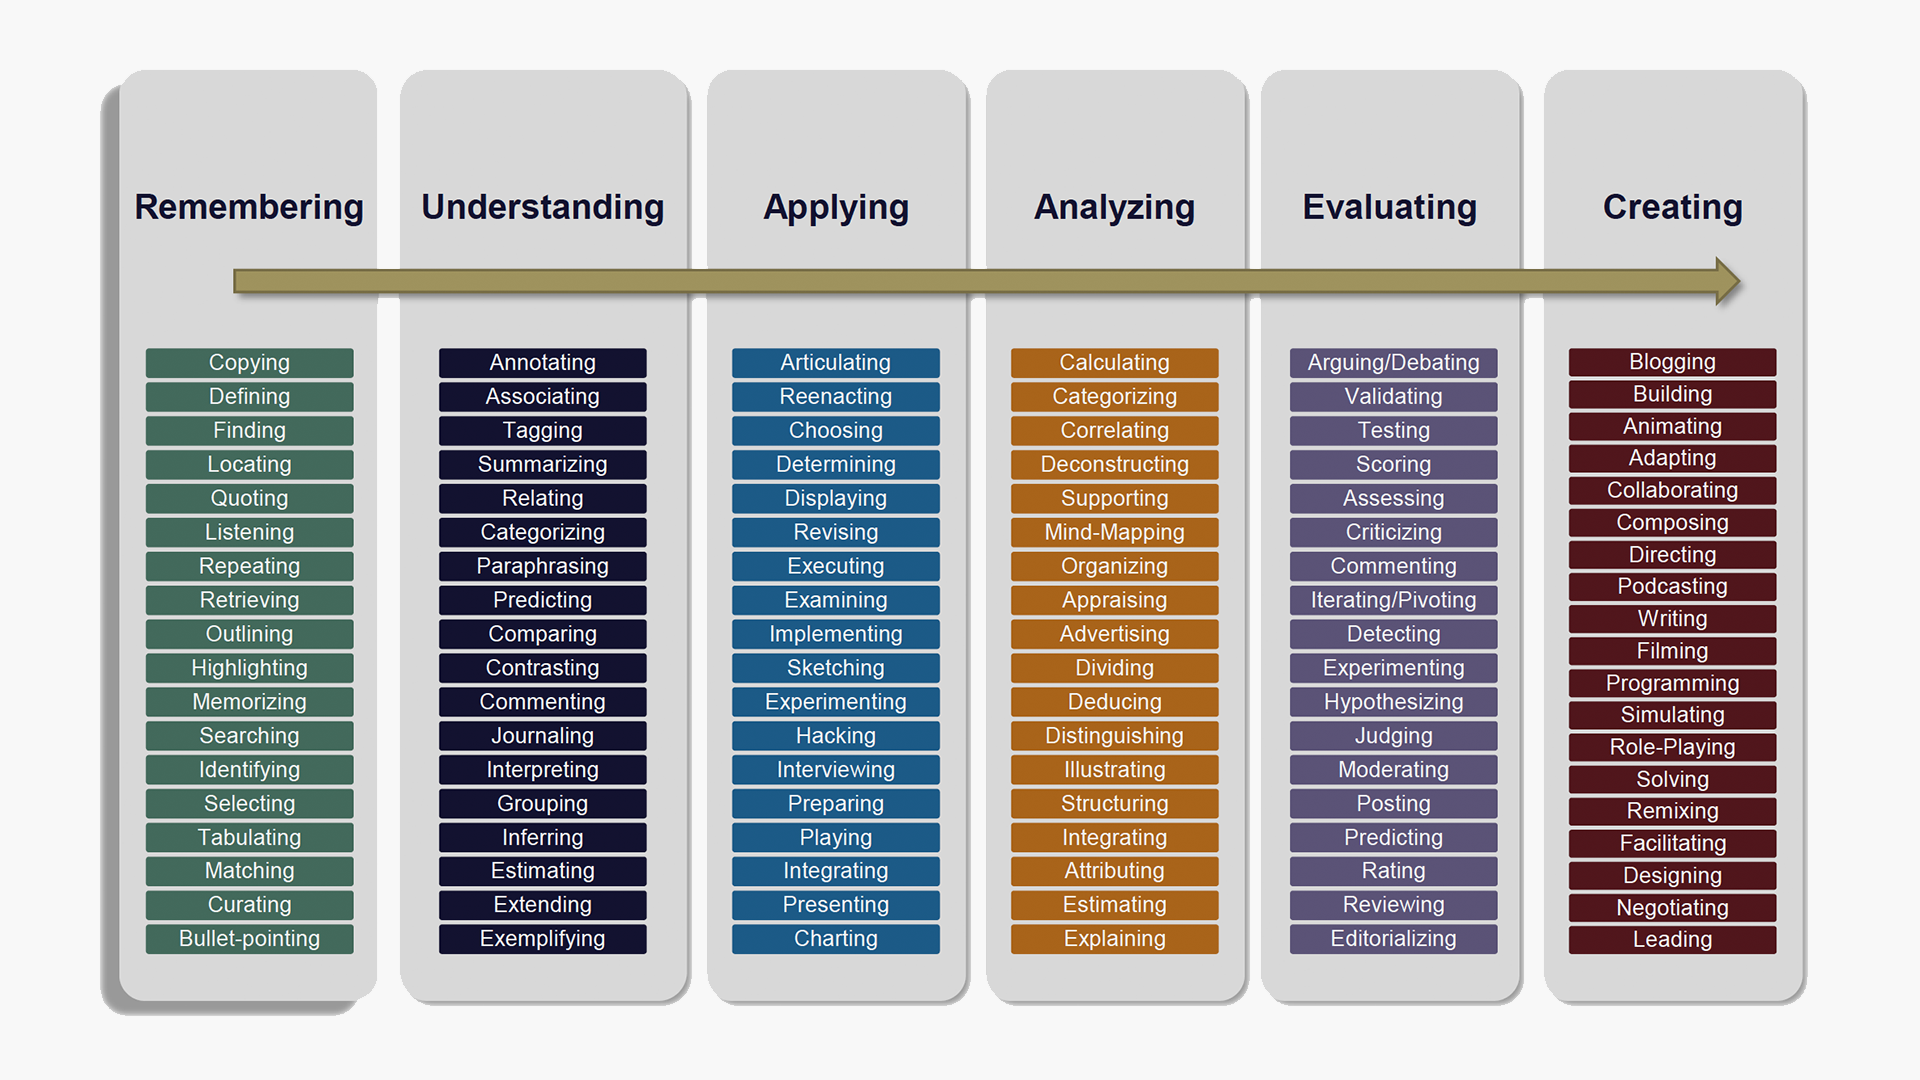 The Blooms Taxonomy for digital learning provides measurable action verbs that increase in difficultly as mastery increases.